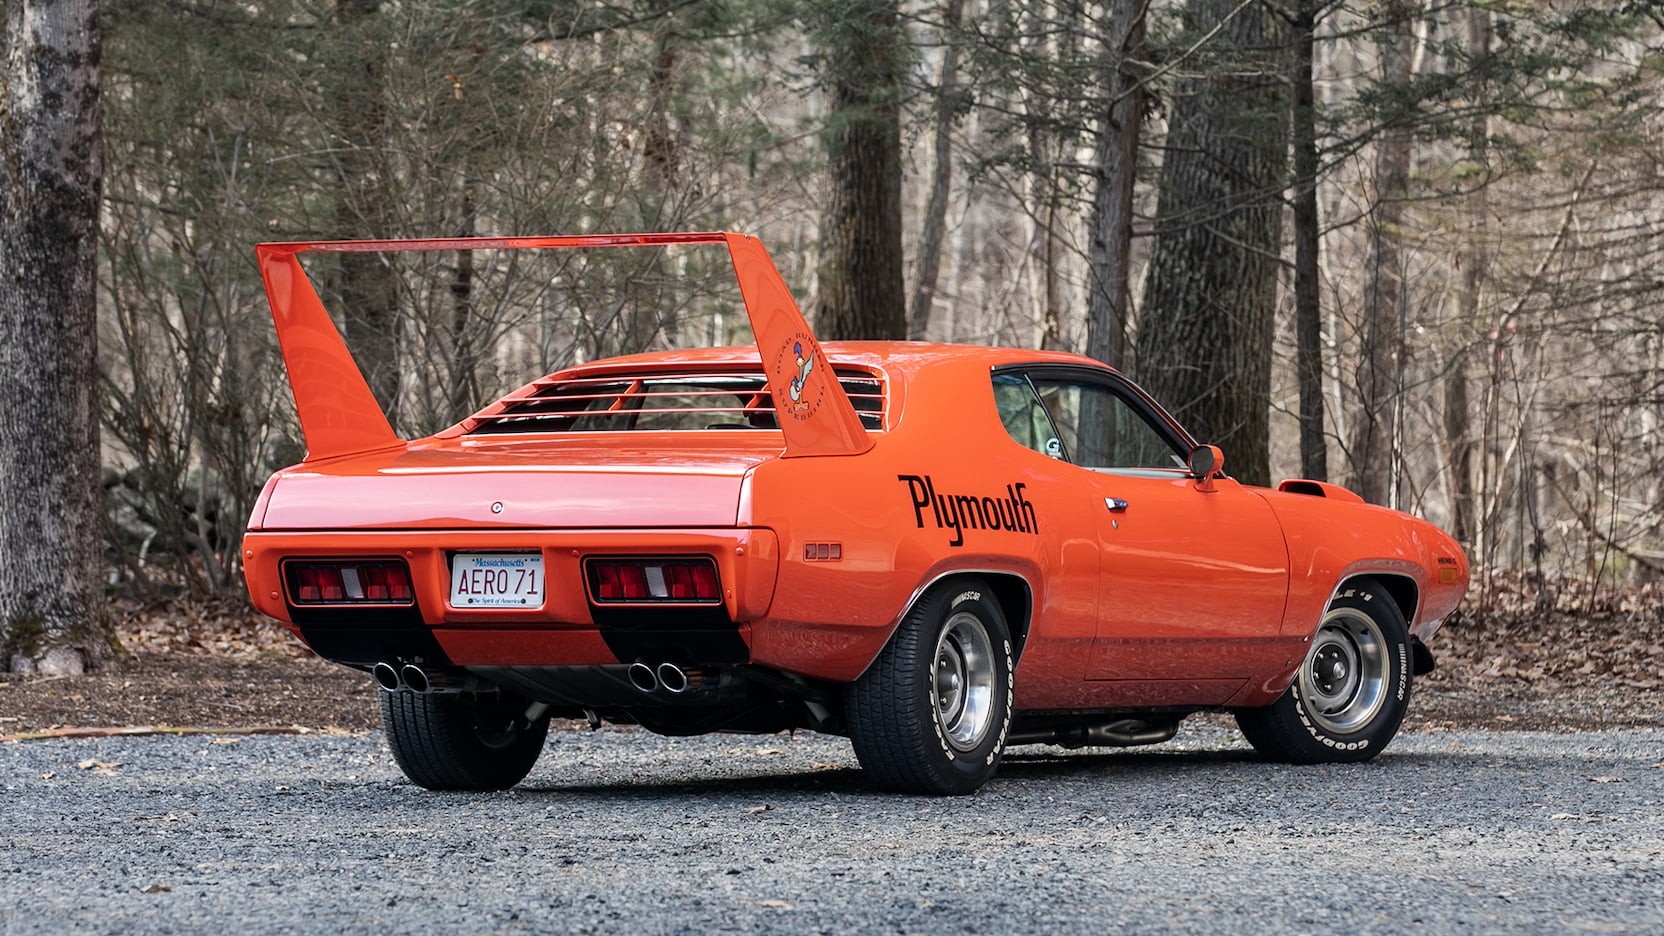 What-If 1971 Plymouth and Dodge Wing Cars Imagine Mopars Without Bill France's Ban